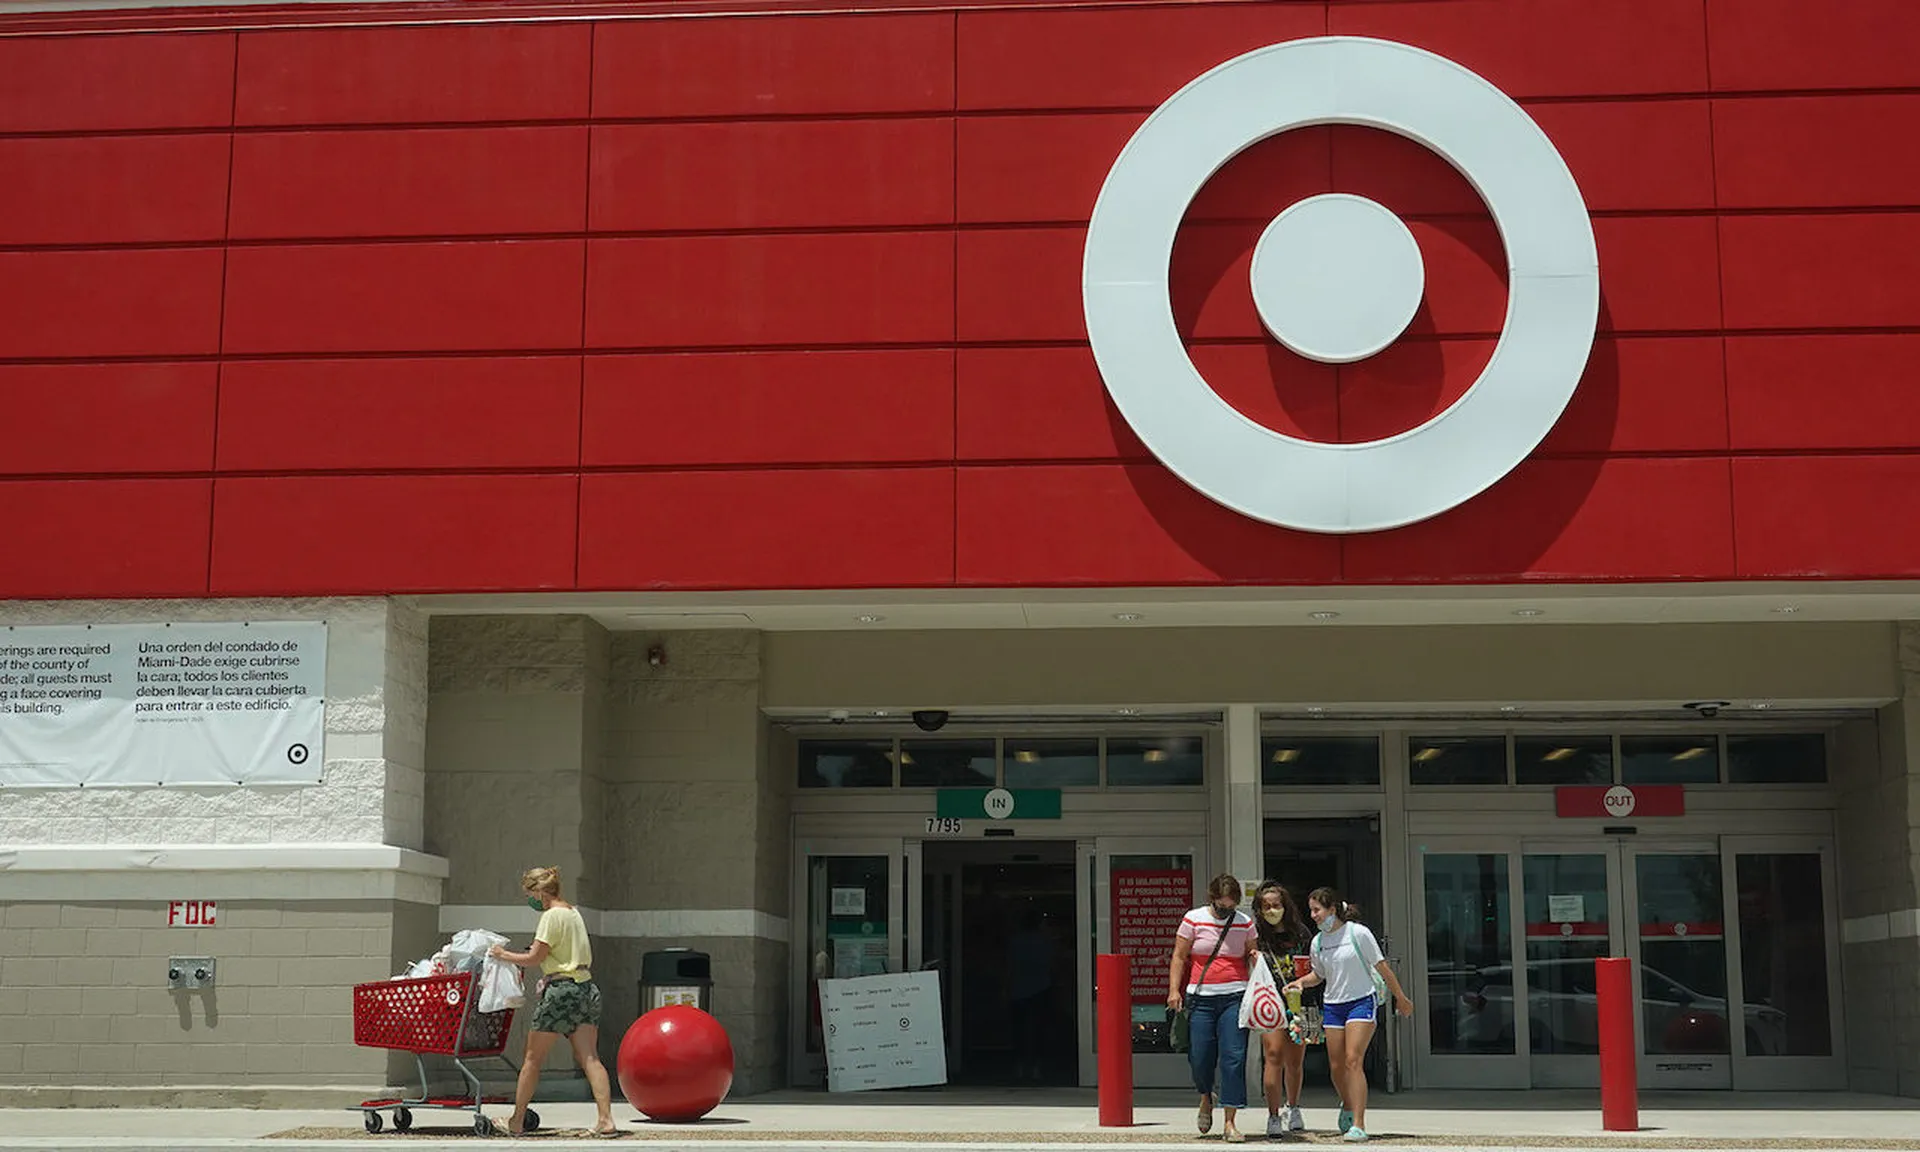 A target store is seen on August 19, 2020 in Miami, Florida. The company saw astounding growth during the pandemic, thanks in part to a tech transformation that enabled secure online commerce. (Photo by Joe Raedle/Getty Images)